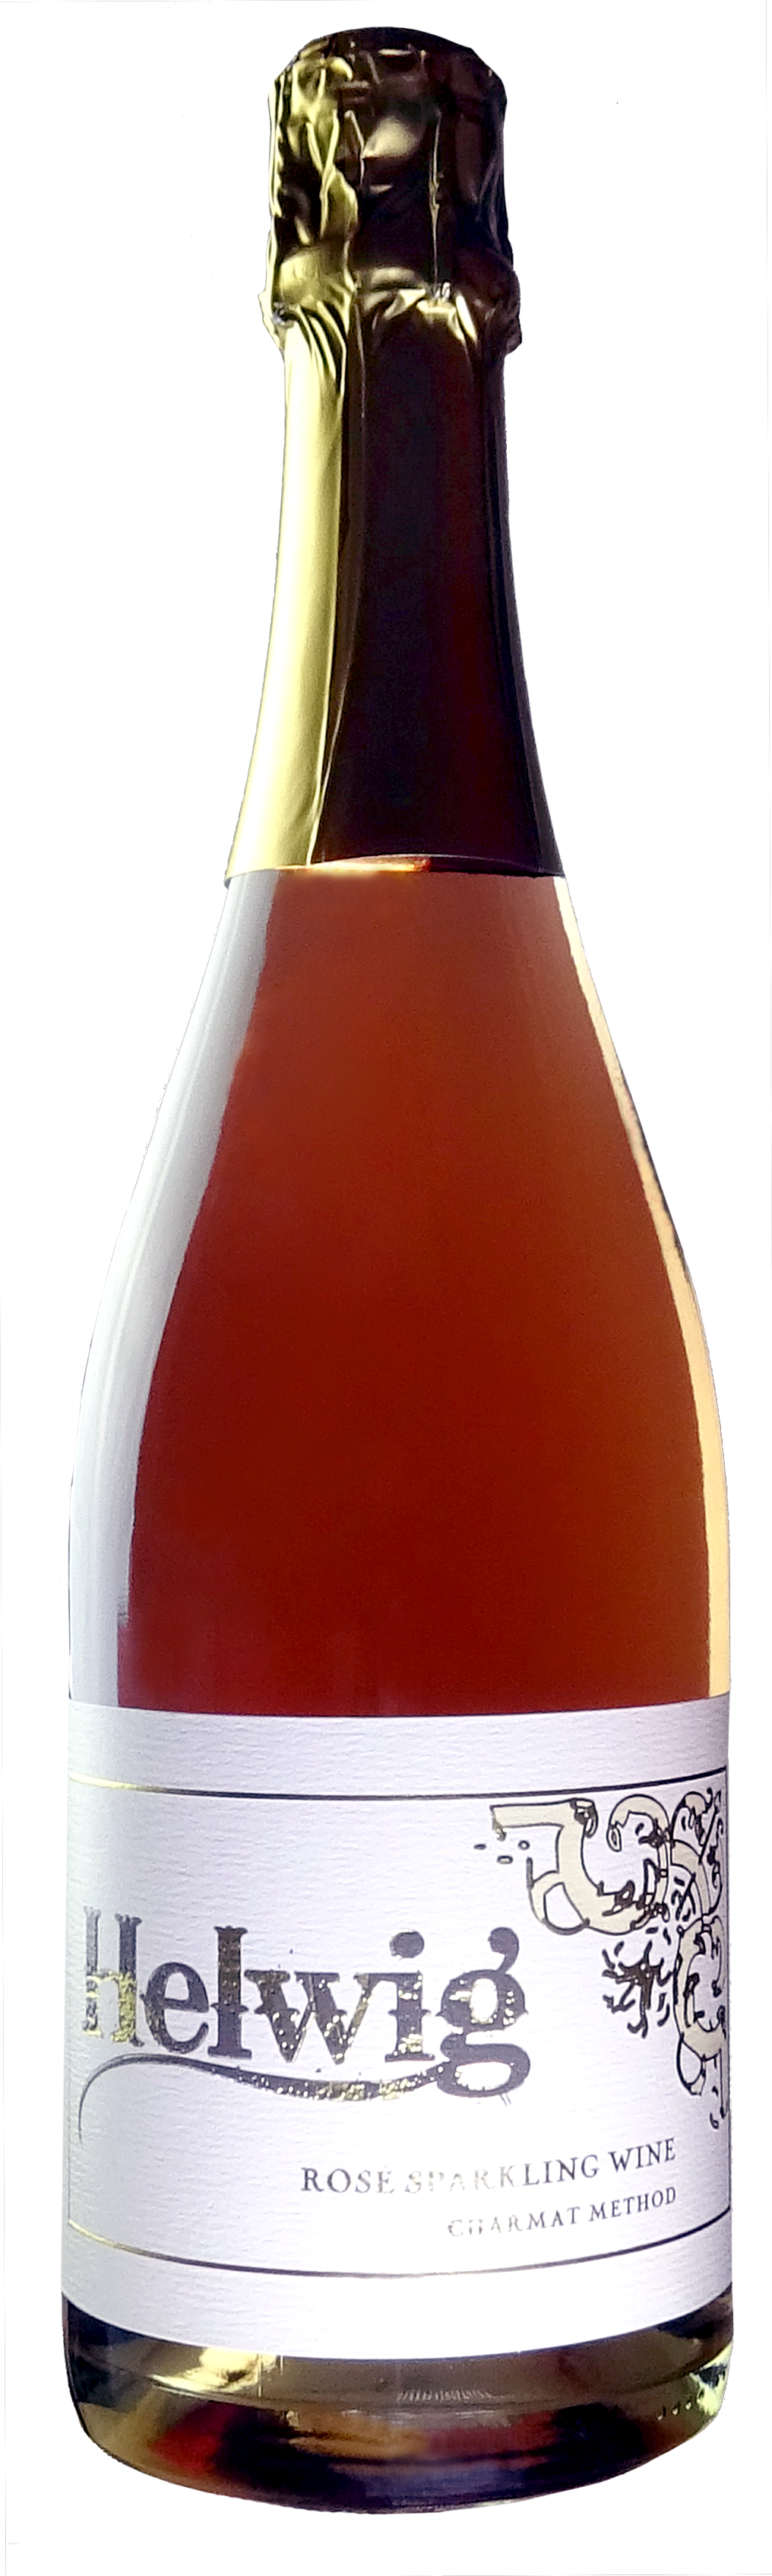 Product Image for Rose Sparkling Wine '21